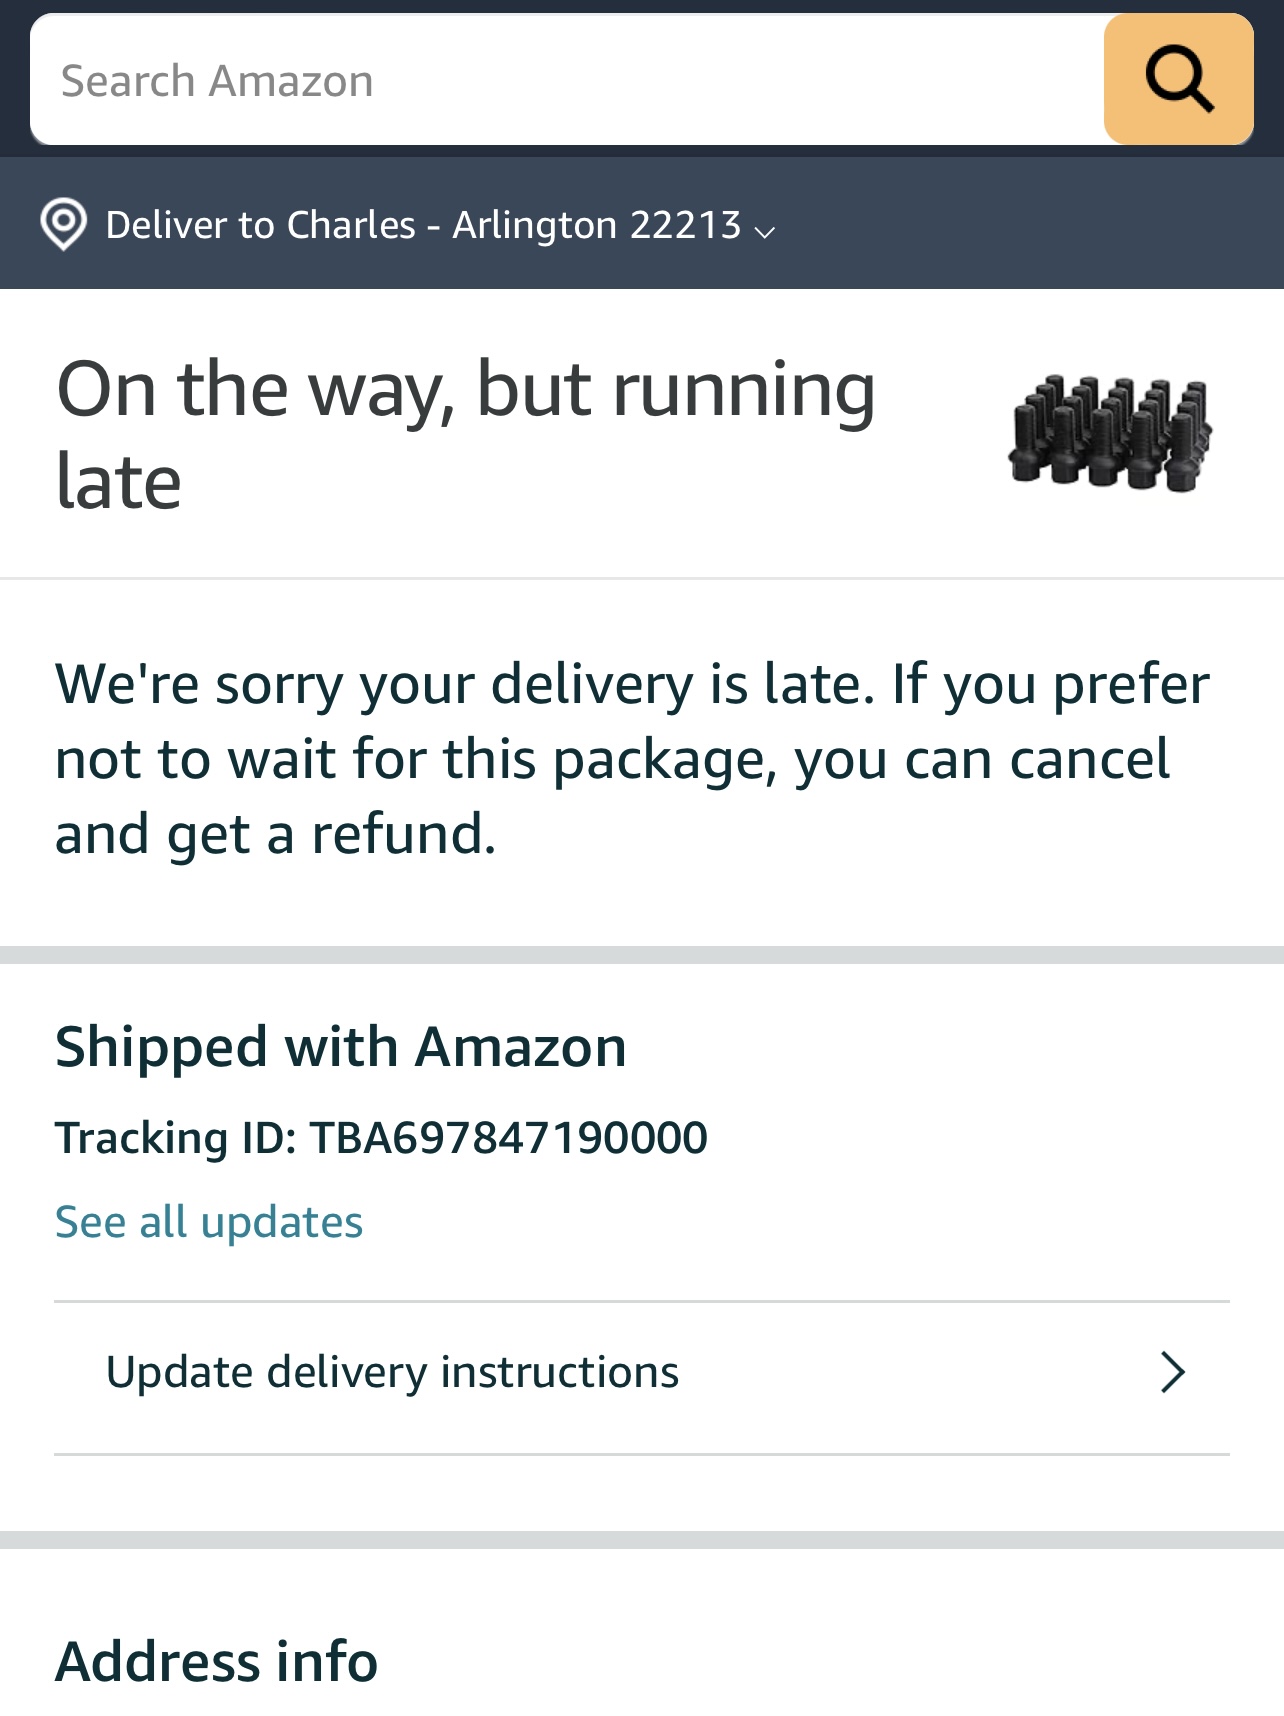 How to Get a Refund If Your  Package Is Delivered Late